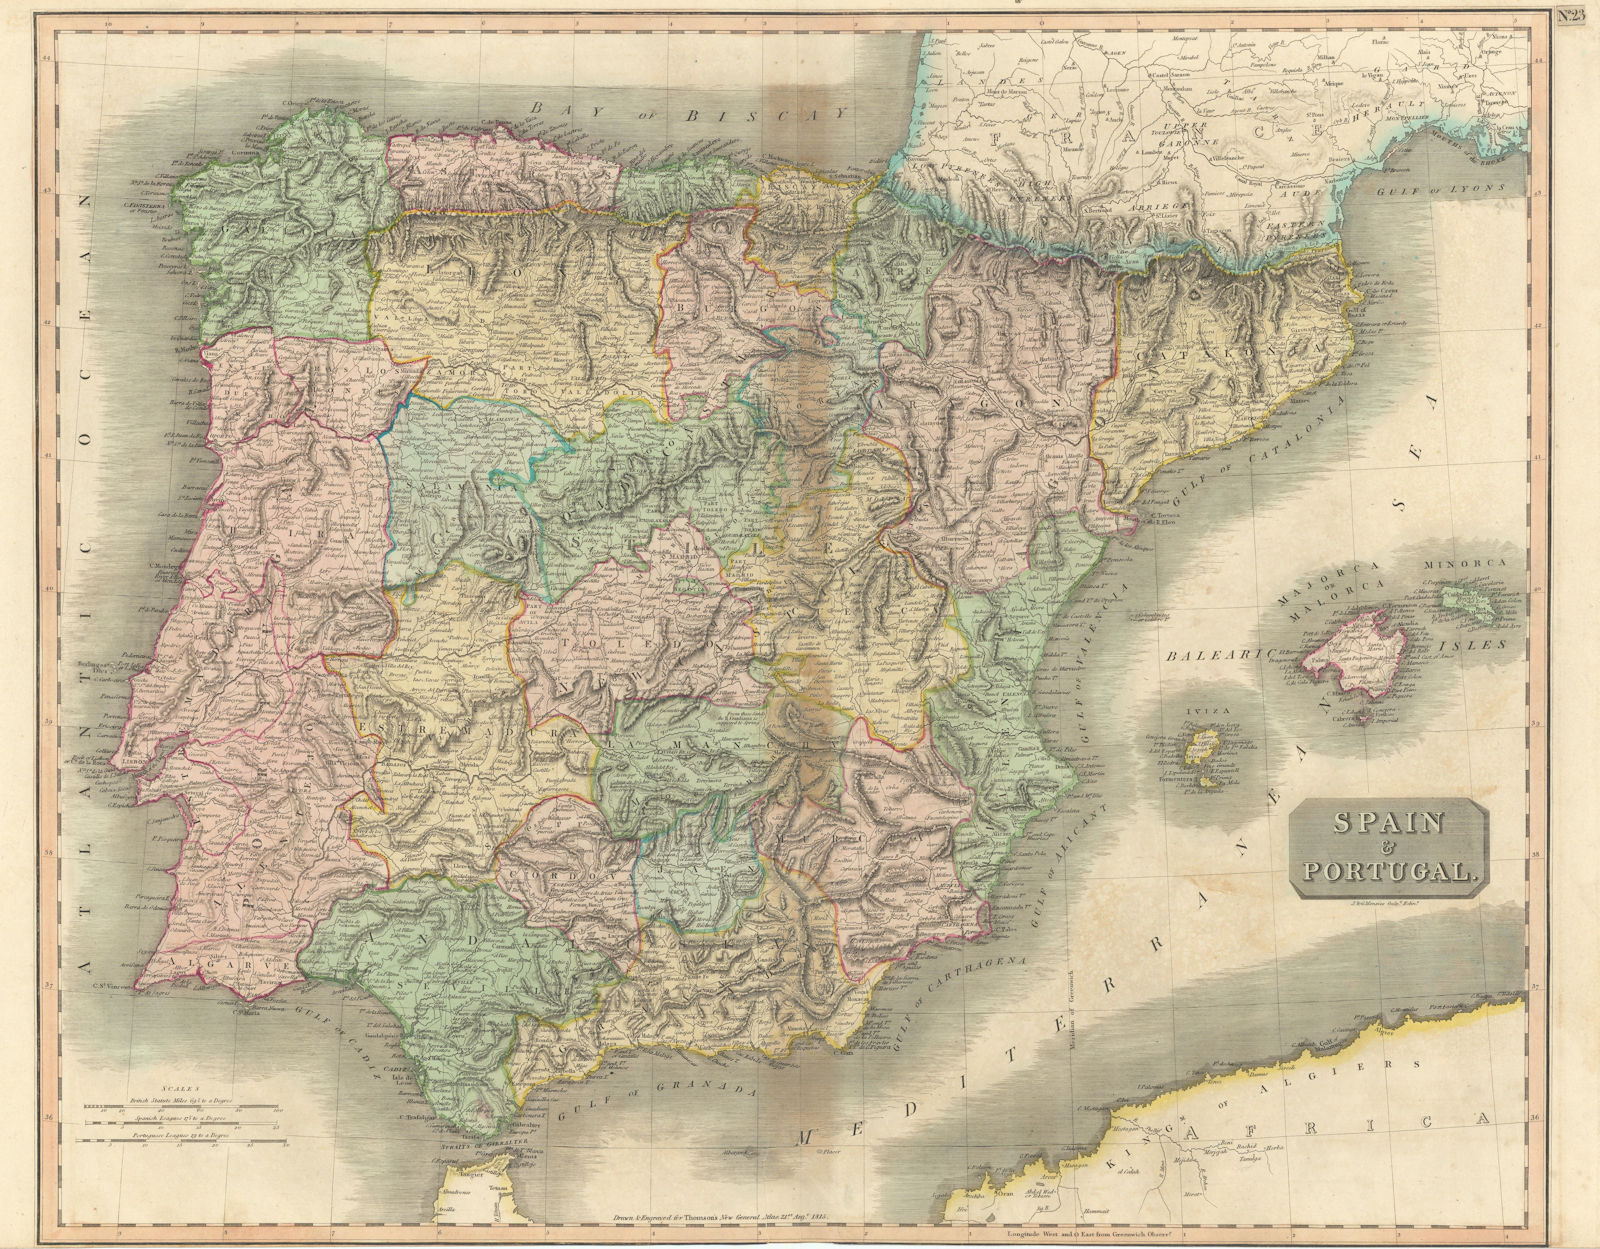 Associate Product "Spain and Portugal" by John Thomson. Provinces. Iberia 1817 old antique map